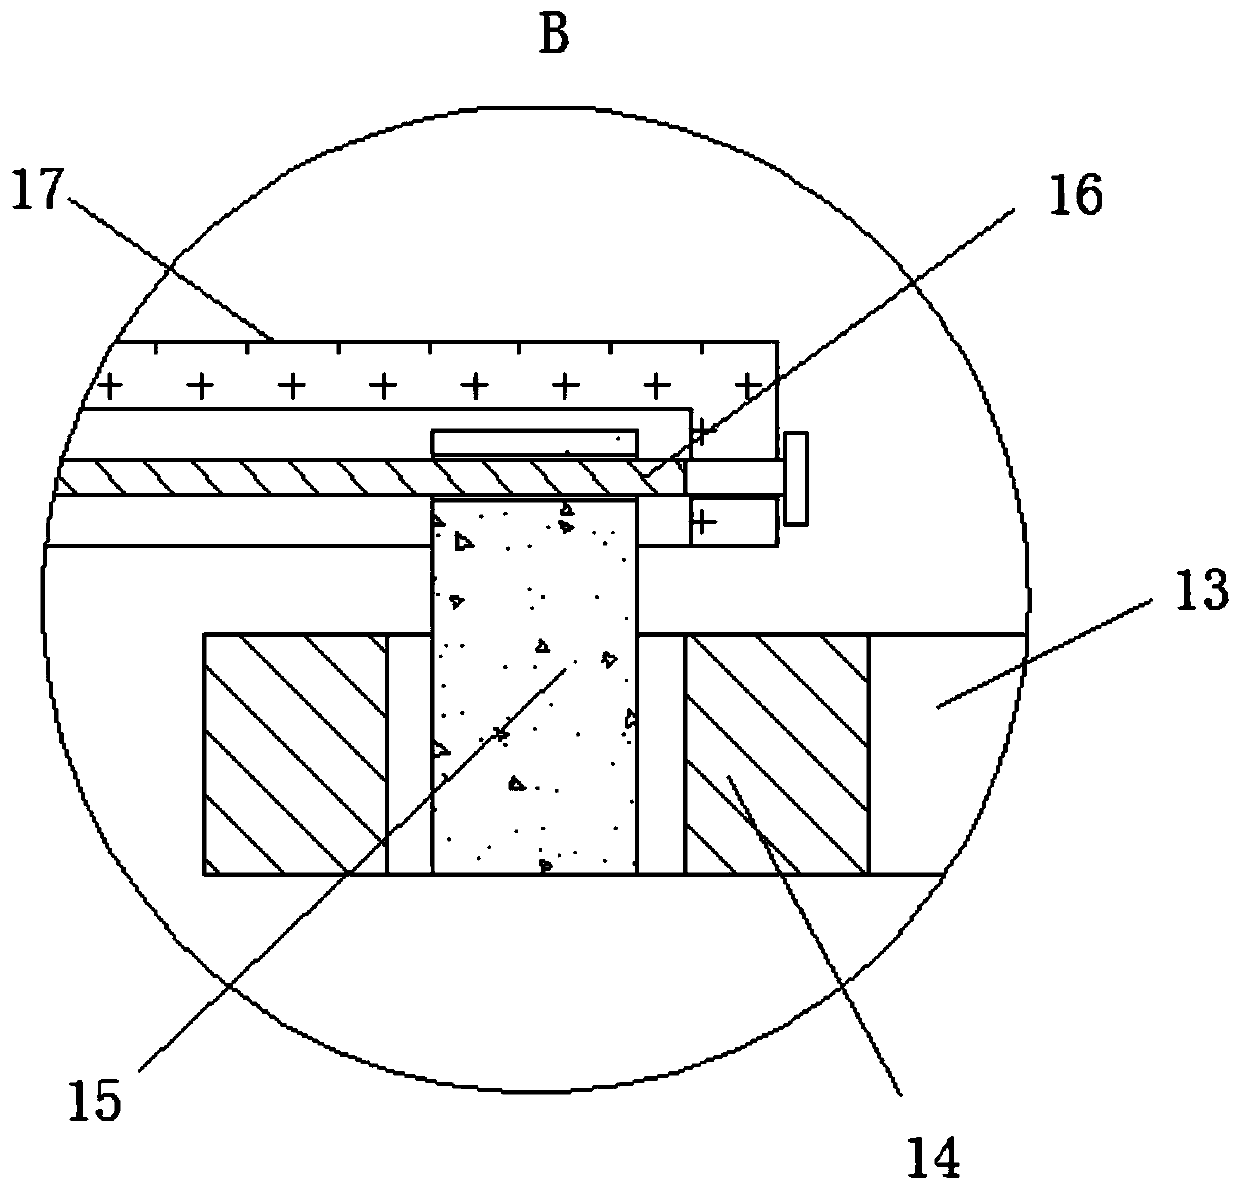 Sheet metal equidistant perforating device based on ratchet motion principle